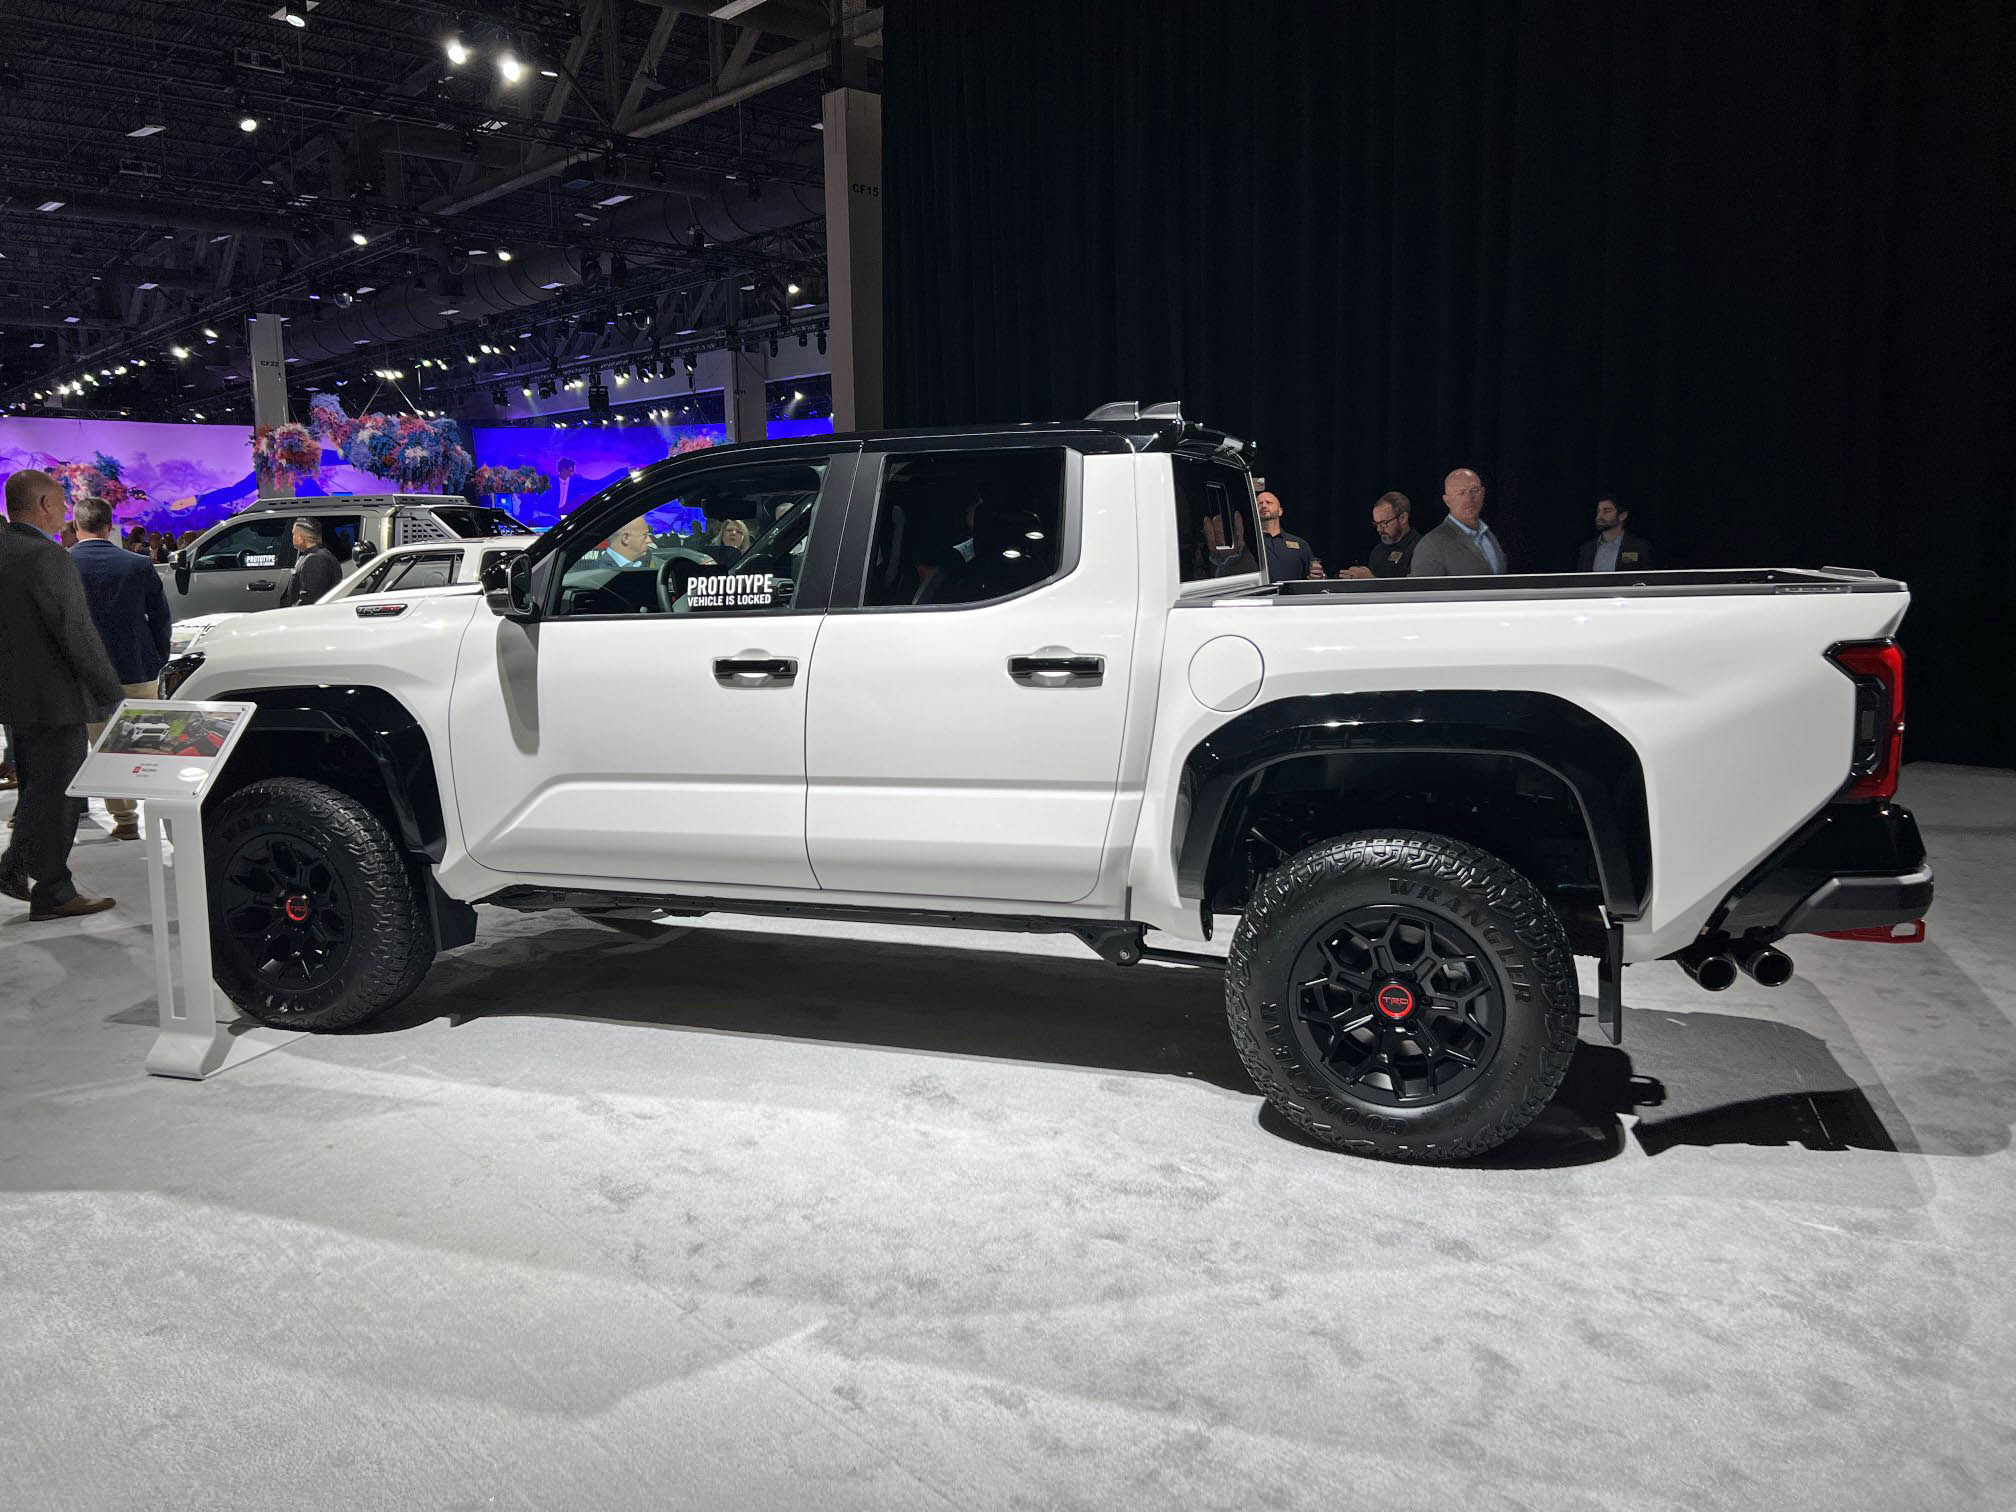 2024 Tacoma Bronze Oxide Trailhunter + Ice Cap White TRD Pro 2024 Tacomas @ Toyota National Dealer Meeting Wind Chill Pearl White 2024 Tacoma TRD Pro  1